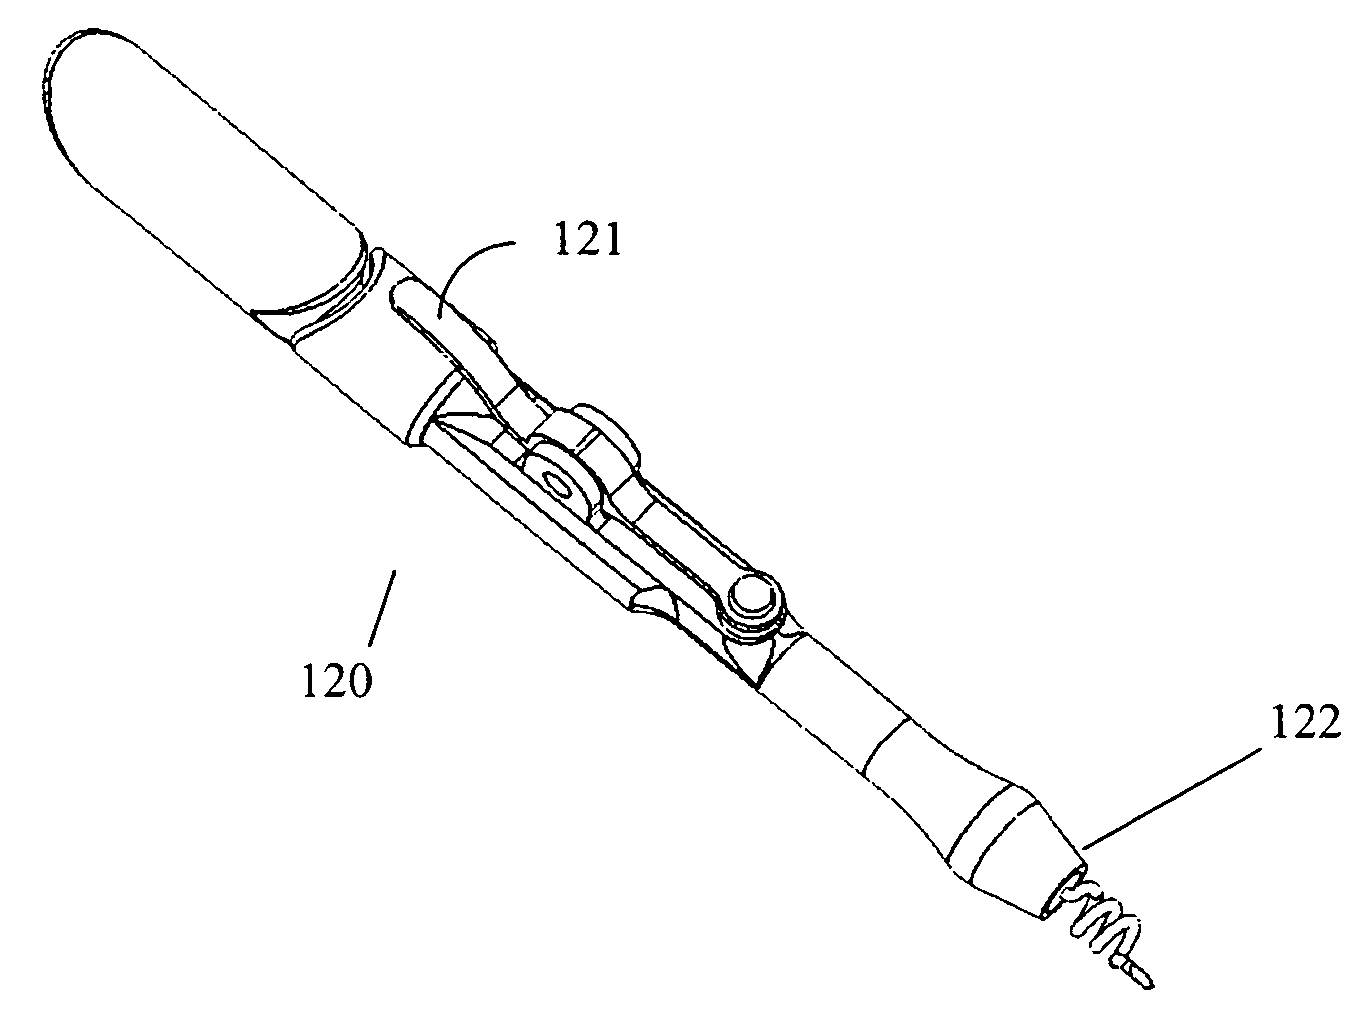 Insertion instrument for non-linear medical devices